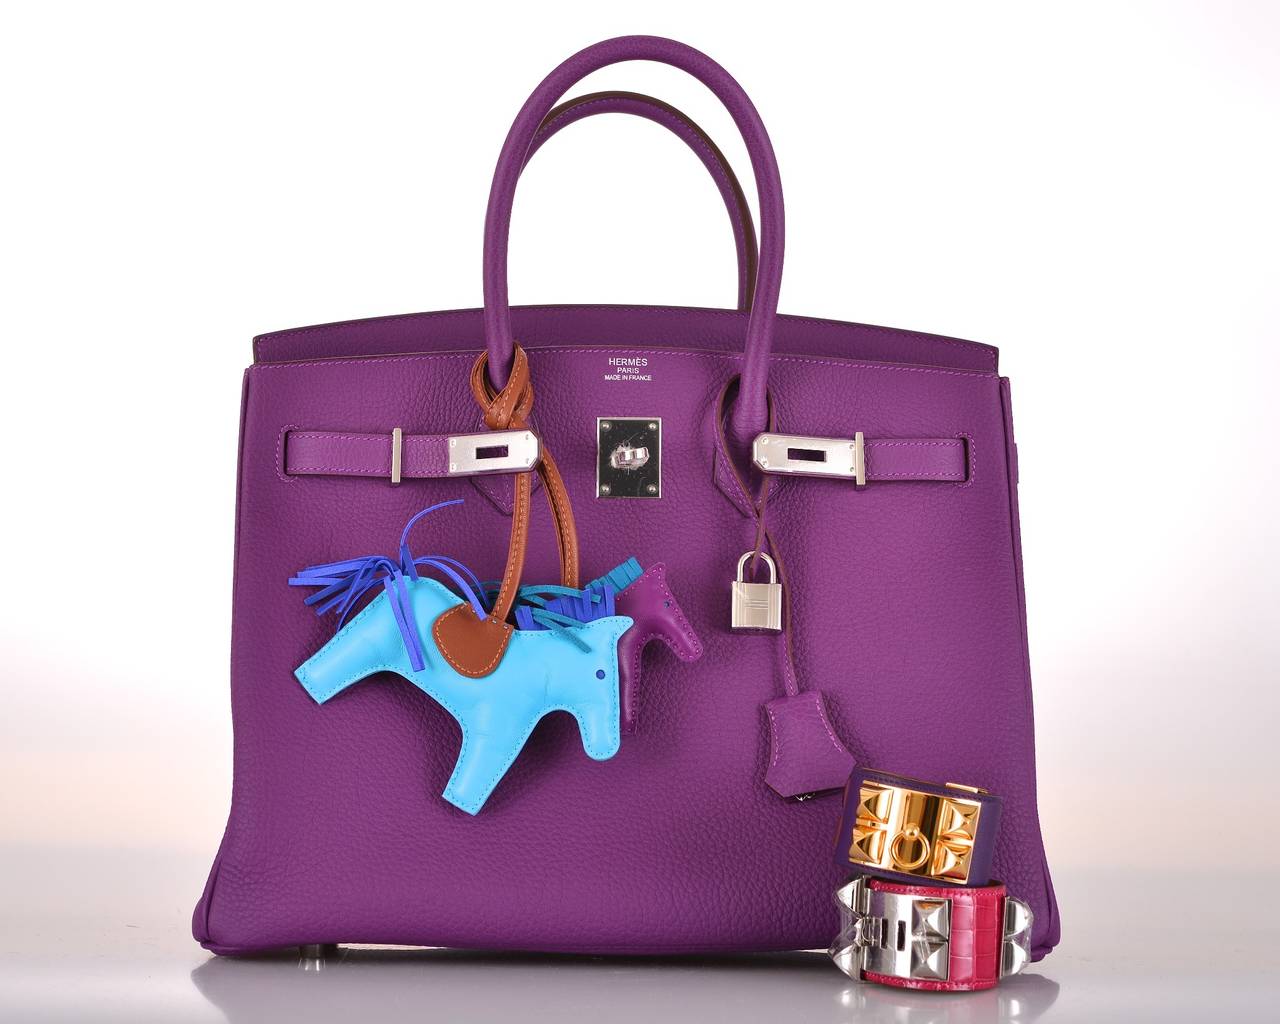 AS ALWAYS, ANOTHER ONE OF MY INCREDIBLE FINDS! THIS IS A VERY BEAUTIFUL NEW COLOR.

GORGEOUS 35cm ANEMONE TOGO LEATHER BIRKIN BAG WITH CHEVRE INTERIOR AND PALLADIUM HARDWARE. 

HERE IS YOUR CHANCE TO GRAB THIS BAG. ABSOLUTELY NEW! FABULOUS